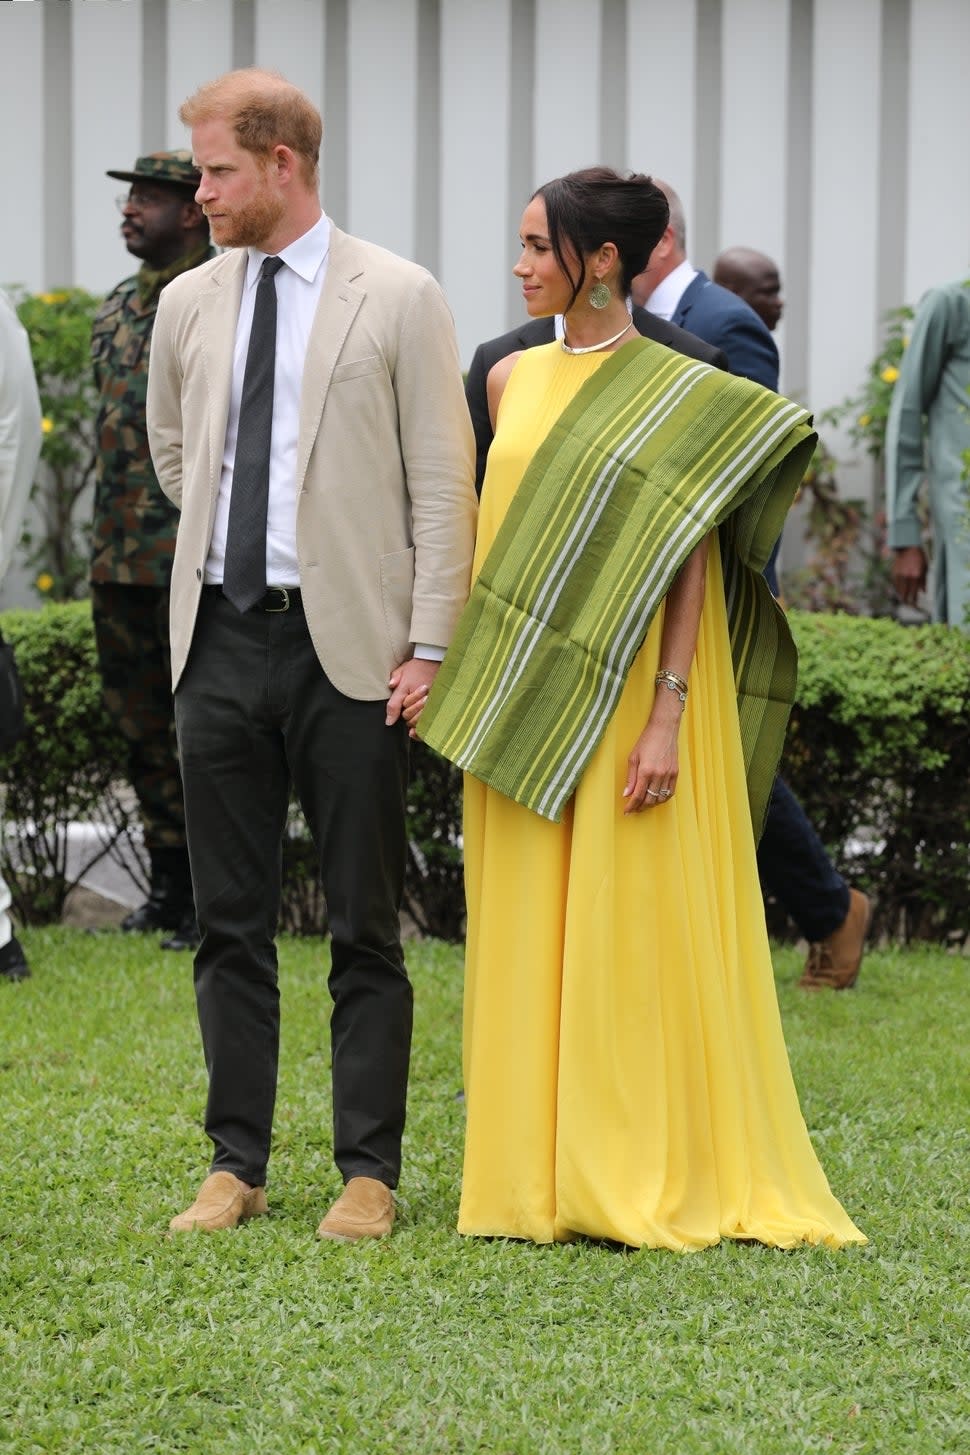 Meghan Markle's paid a sweet nod to her children with her yellow dress during her visit to Nigeria